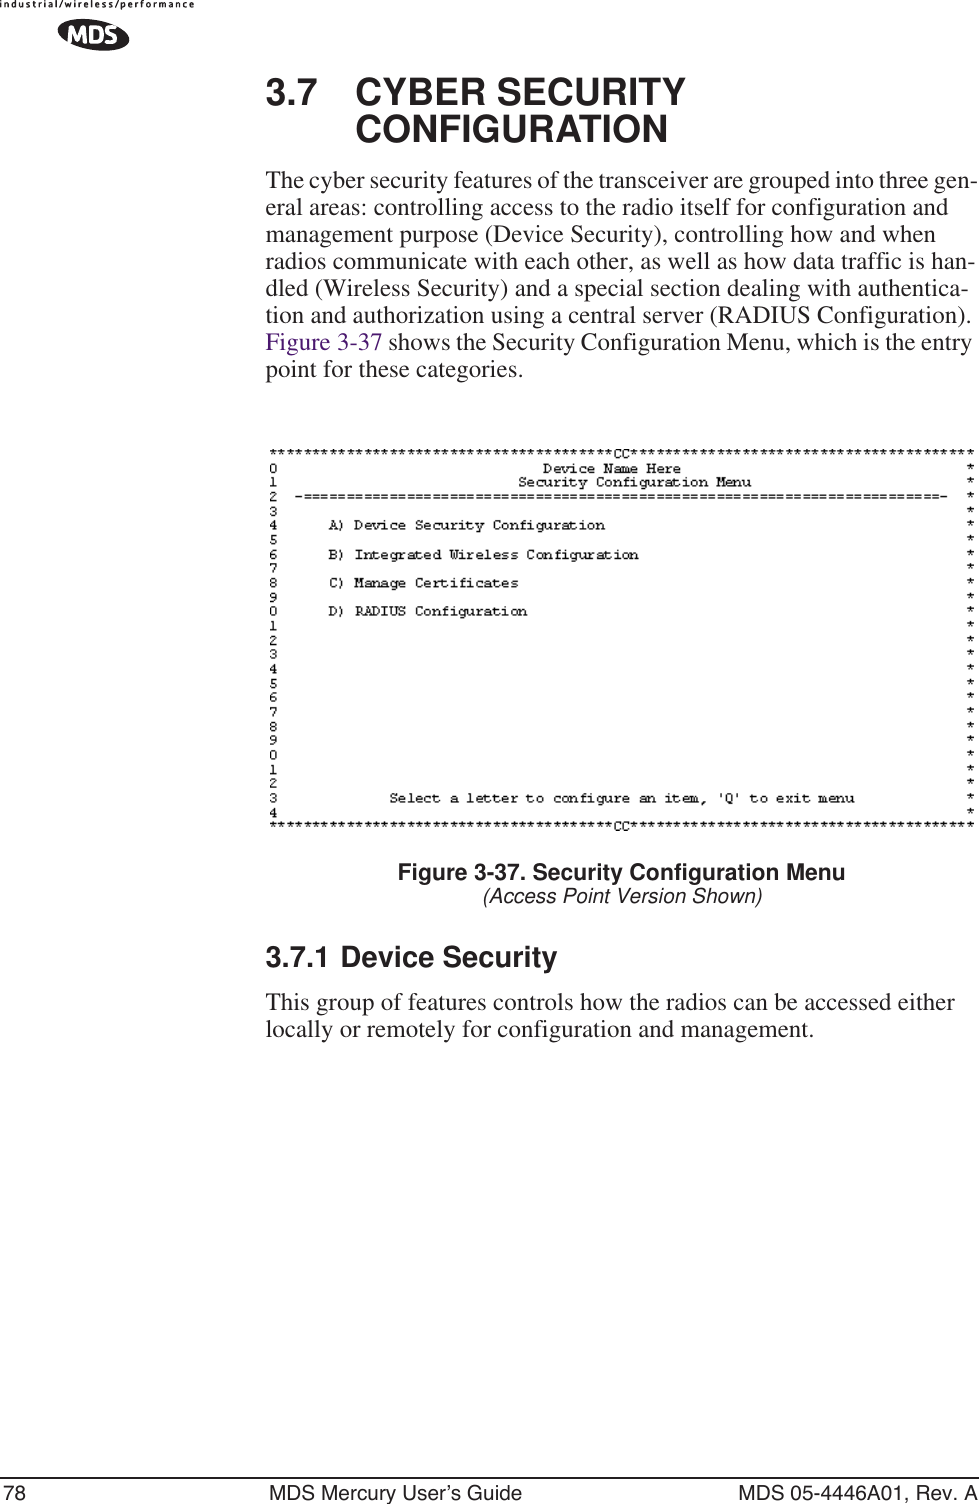 78 MDS Mercury User’s Guide MDS 05-4446A01, Rev. A3.7 CYBER SECURITY CONFIGURATIONThe cyber security features of the transceiver are grouped into three gen-eral areas: controlling access to the radio itself for configuration and management purpose (Device Security), controlling how and when radios communicate with each other, as well as how data traffic is han-dled (Wireless Security) and a special section dealing with authentica-tion and authorization using a central server (RADIUS Configuration). Figure 3-37 shows the Security Configuration Menu, which is the entry point for these categories.Figure 3-37. Security Configuration Menu(Access Point Version Shown)3.7.1 Device SecurityThis group of features controls how the radios can be accessed either locally or remotely for configuration and management.